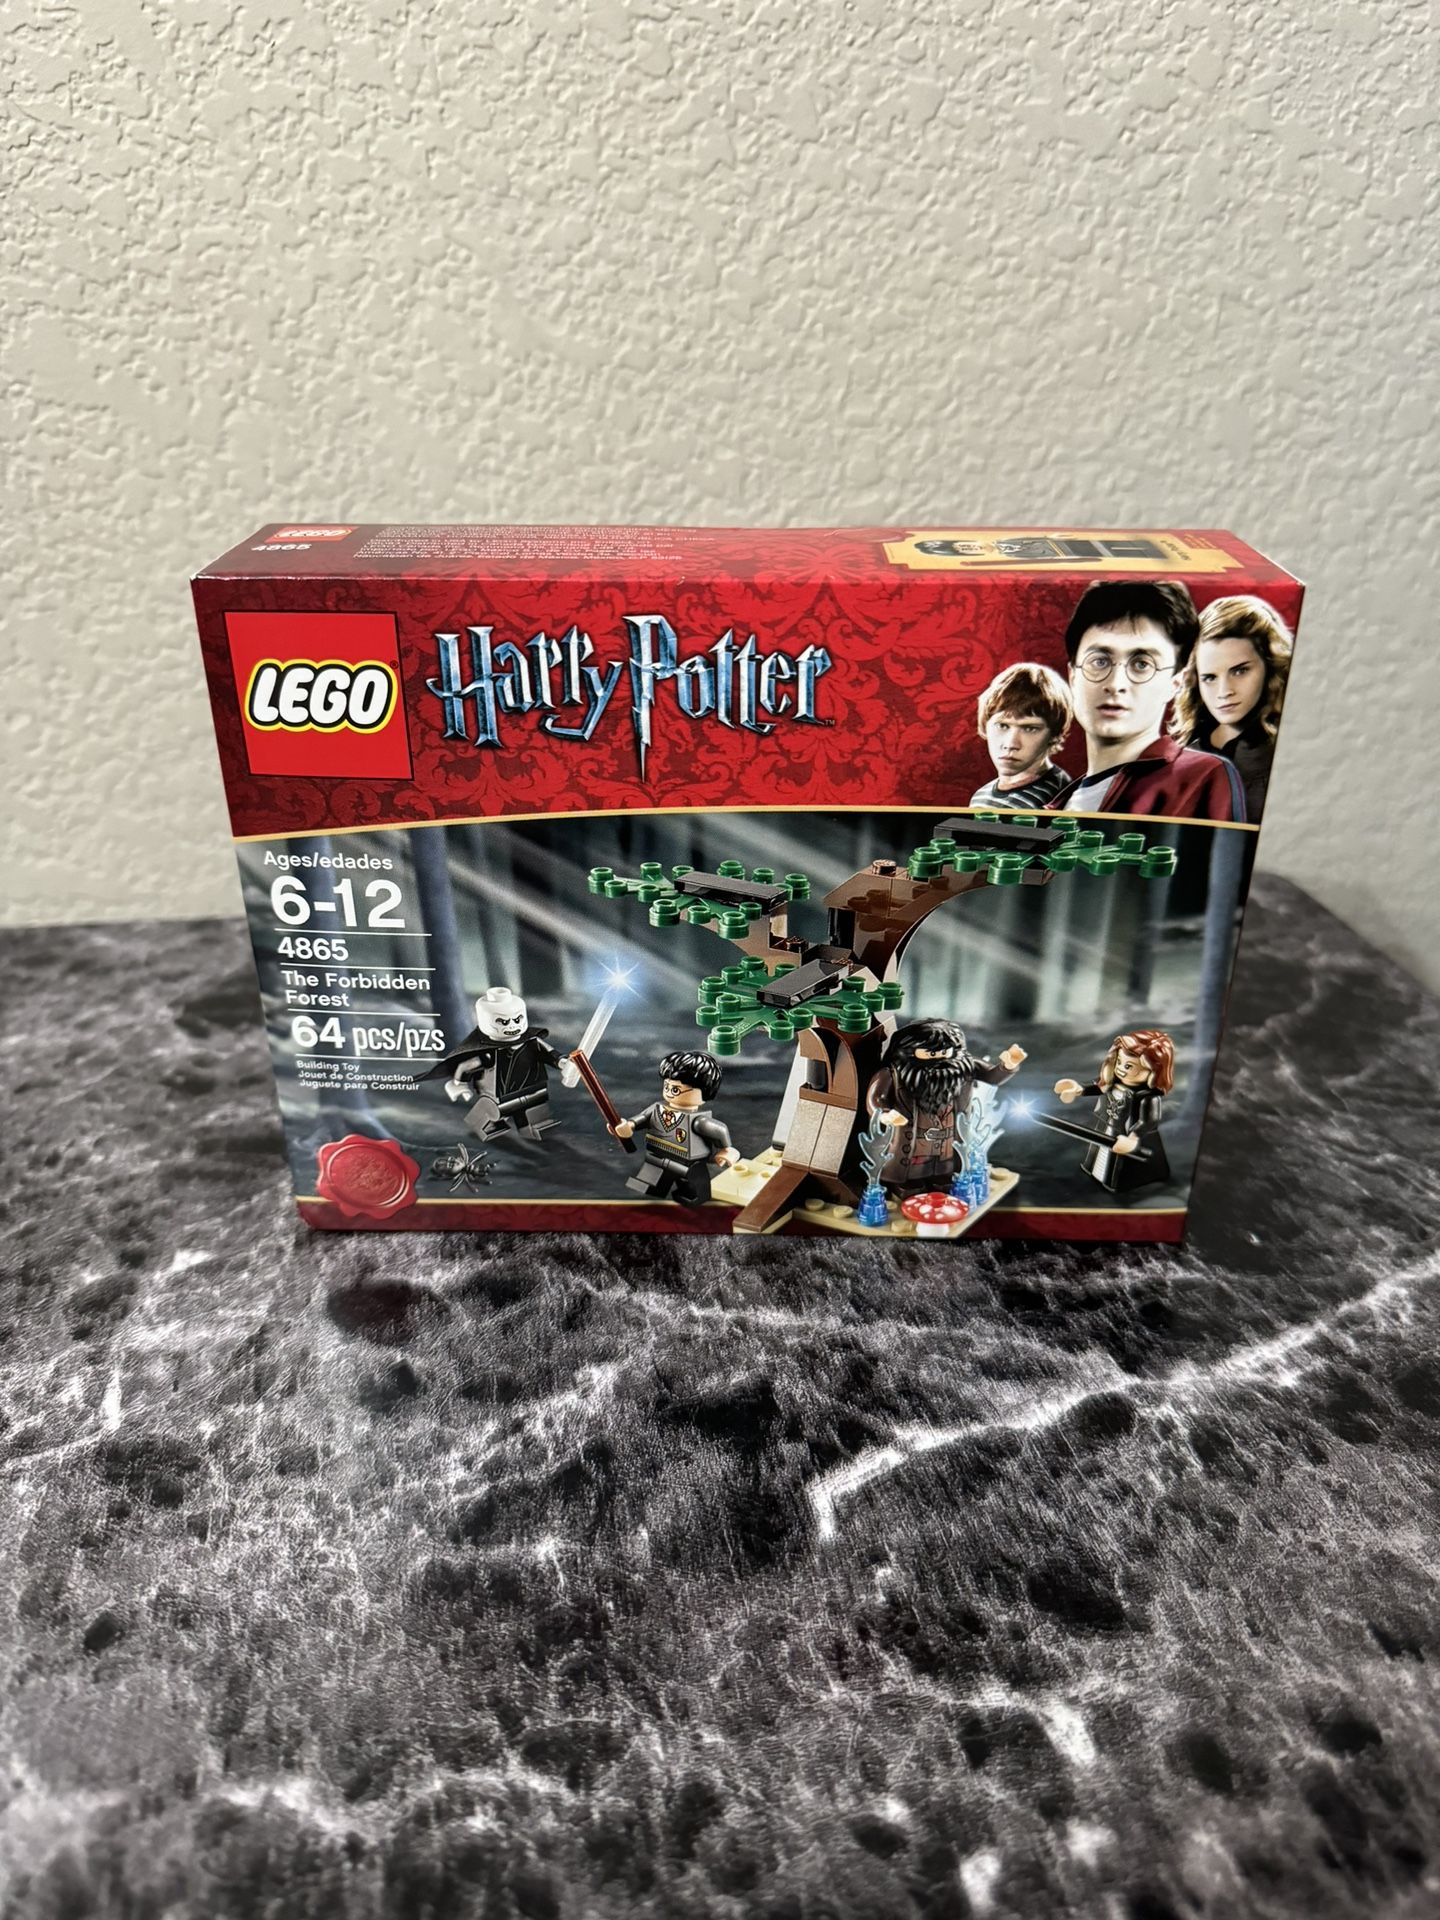 LEGO Harry Potter: The Forbidden Forest (4865)